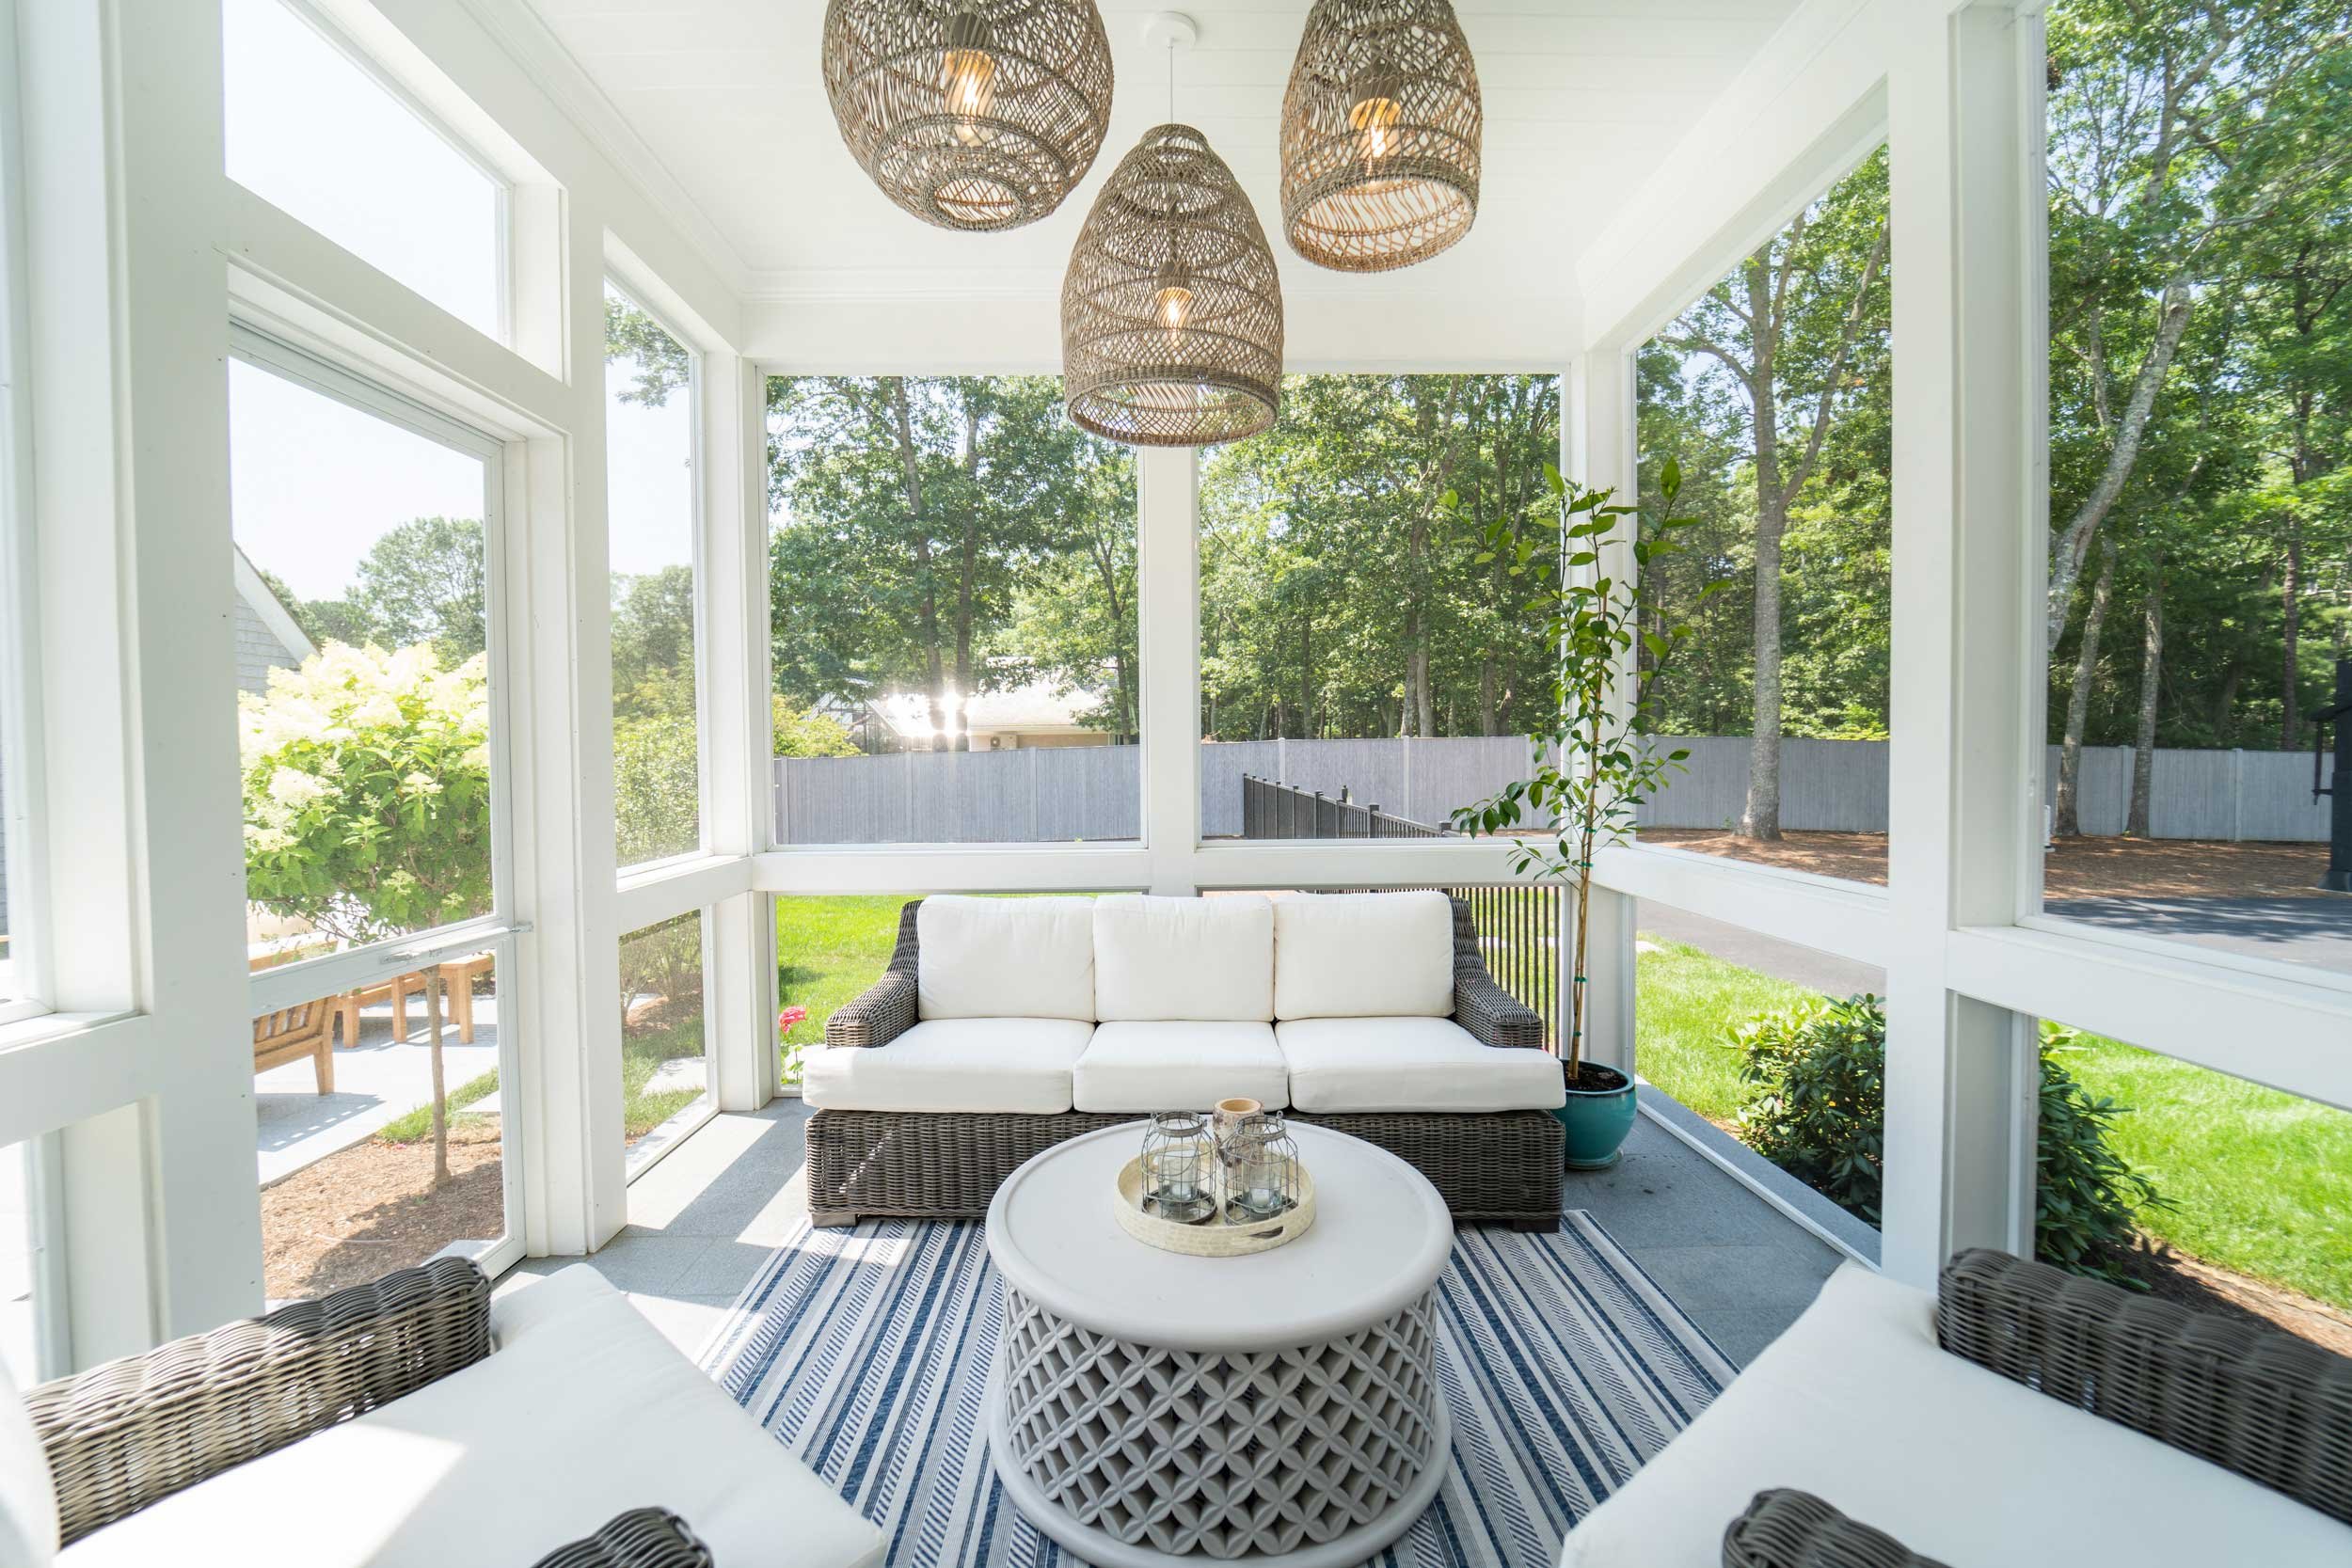 james-golden-oyster-harbors-family-compound-screened-porch-lanterns.jpg